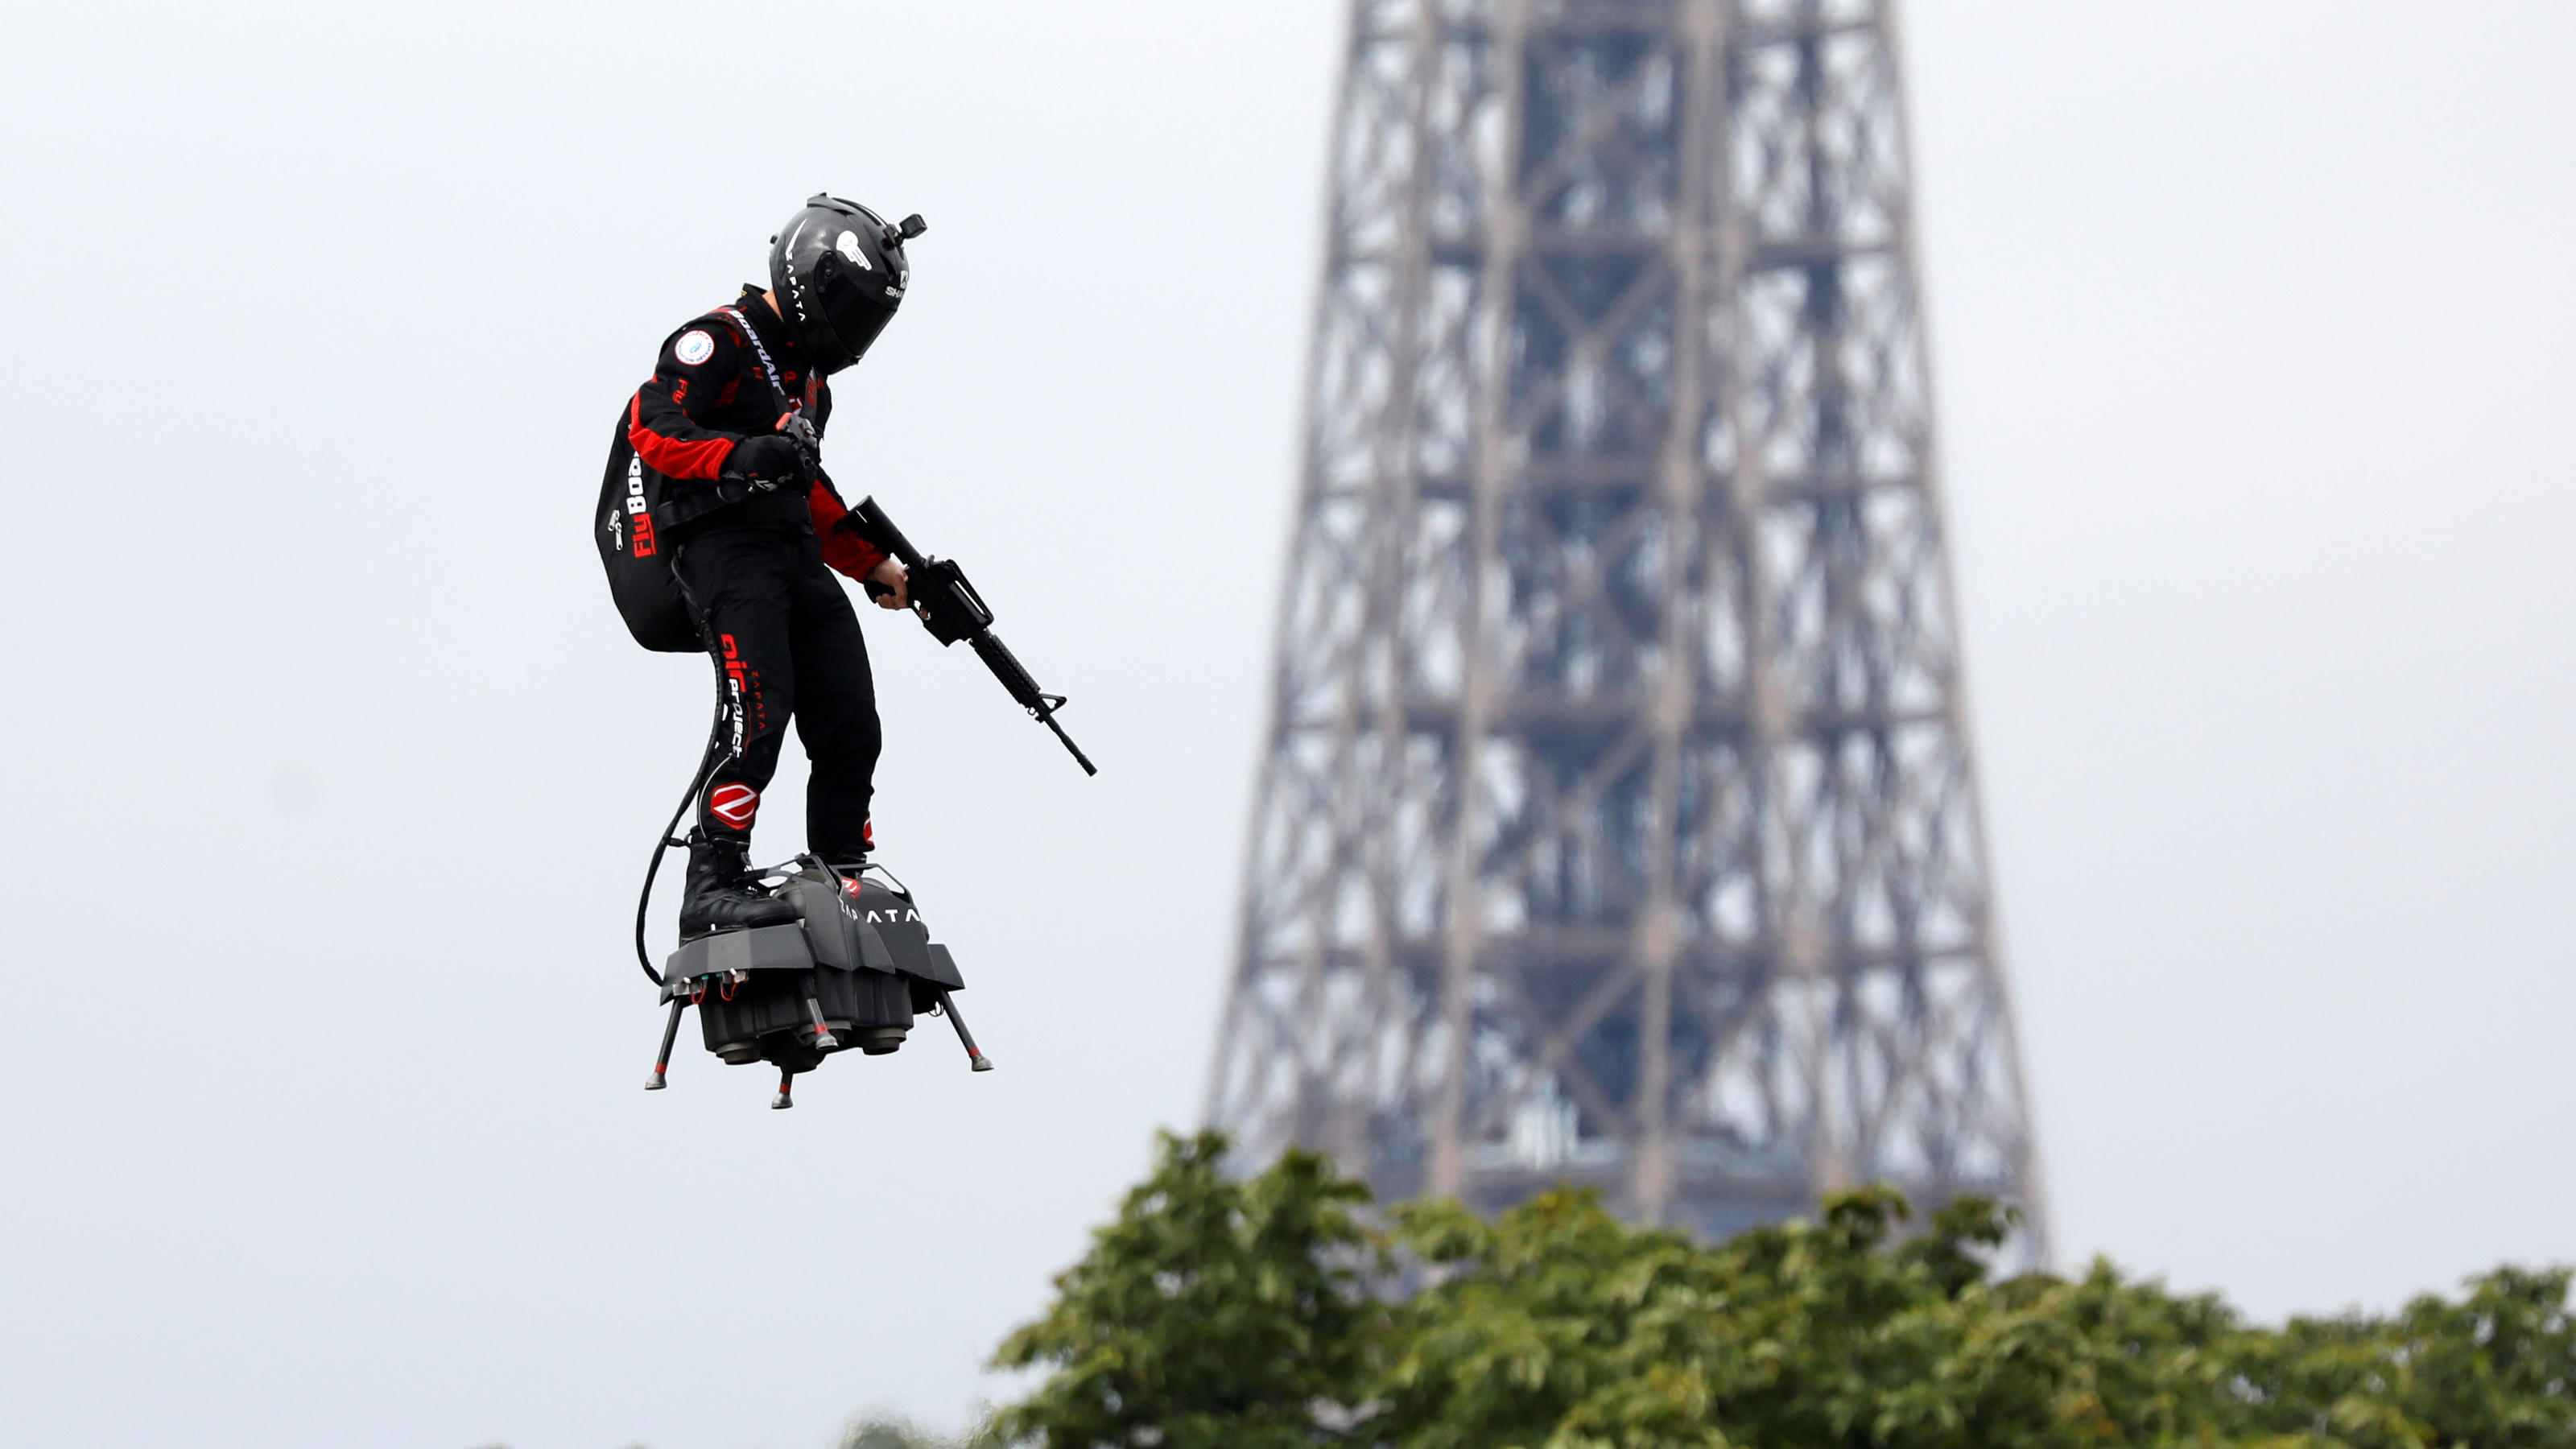 Franky Zapata flies on a Flyboard near the Eiffel Tower during the traditional Bastille Day military parade on the Champs-Elysees Avenue in Paris, France, July 14, 2019. REUTERS/Charles Platiau